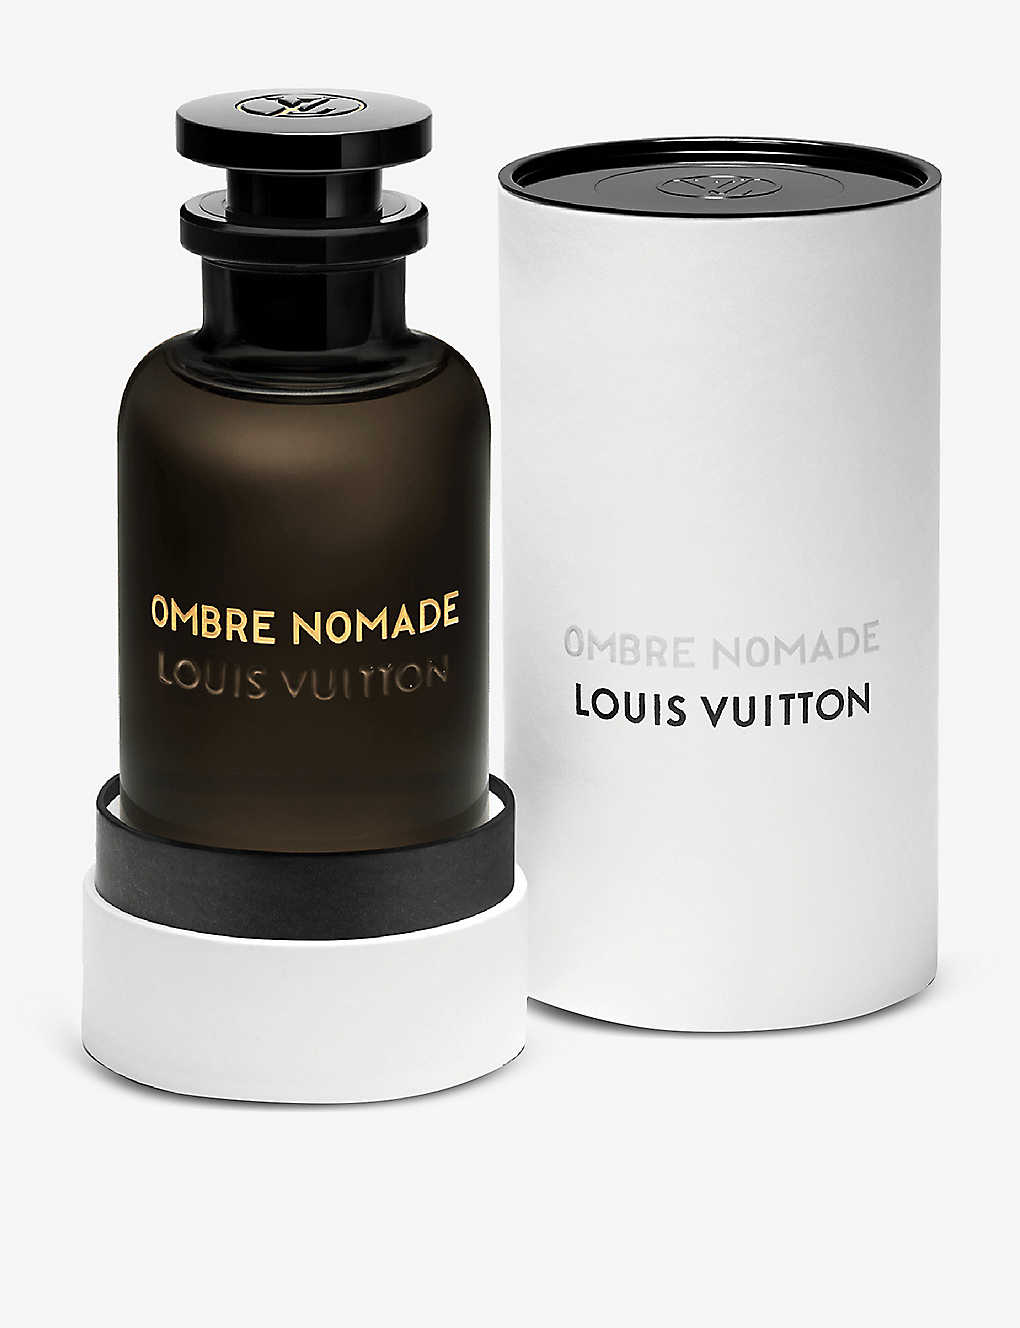 Louis Vuitton Ombre Nomade Review Archives - Looking Feeling